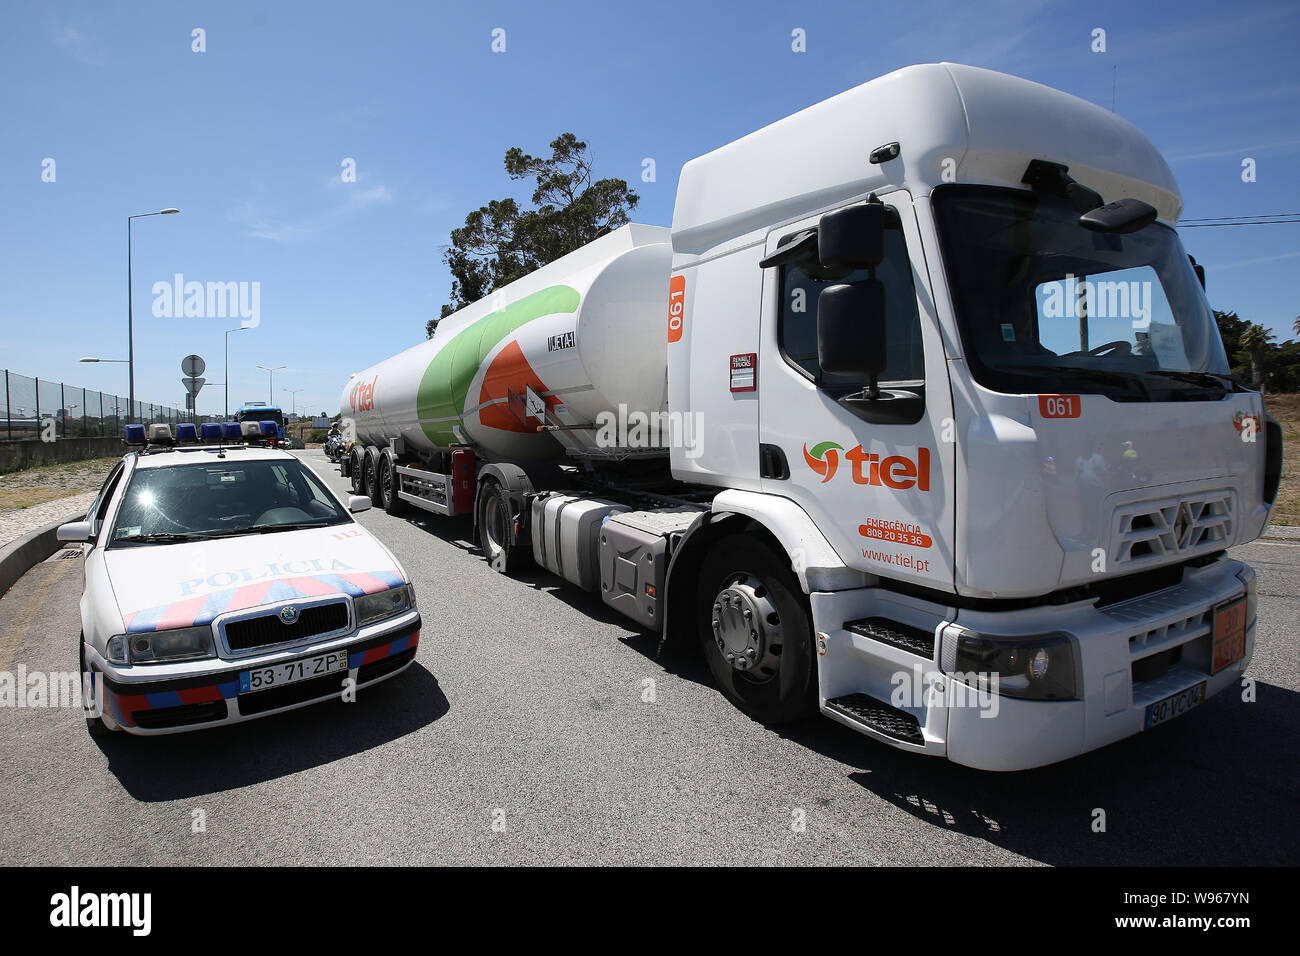 Lisbon, Portugal. 12th Aug, 2019. Police escort a fuel-tanker arriving at the Humberto Delgado Airport in Lisbon, Portugal, on Aug. 12, 2019. Portuguese fuel-tanker drivers' national strike began as scheduled since Monday for an indefinite period. Portugal's government has ordered minimum services of between 50 percent and 100 percent and has declared an energy crisis, which implies 'exceptional measures' to minimize the effects of strike to ensure the provision of essential services such as security forces and medical emergencies. Credit: Pedro Fiuza/Xinhua Stock Photo